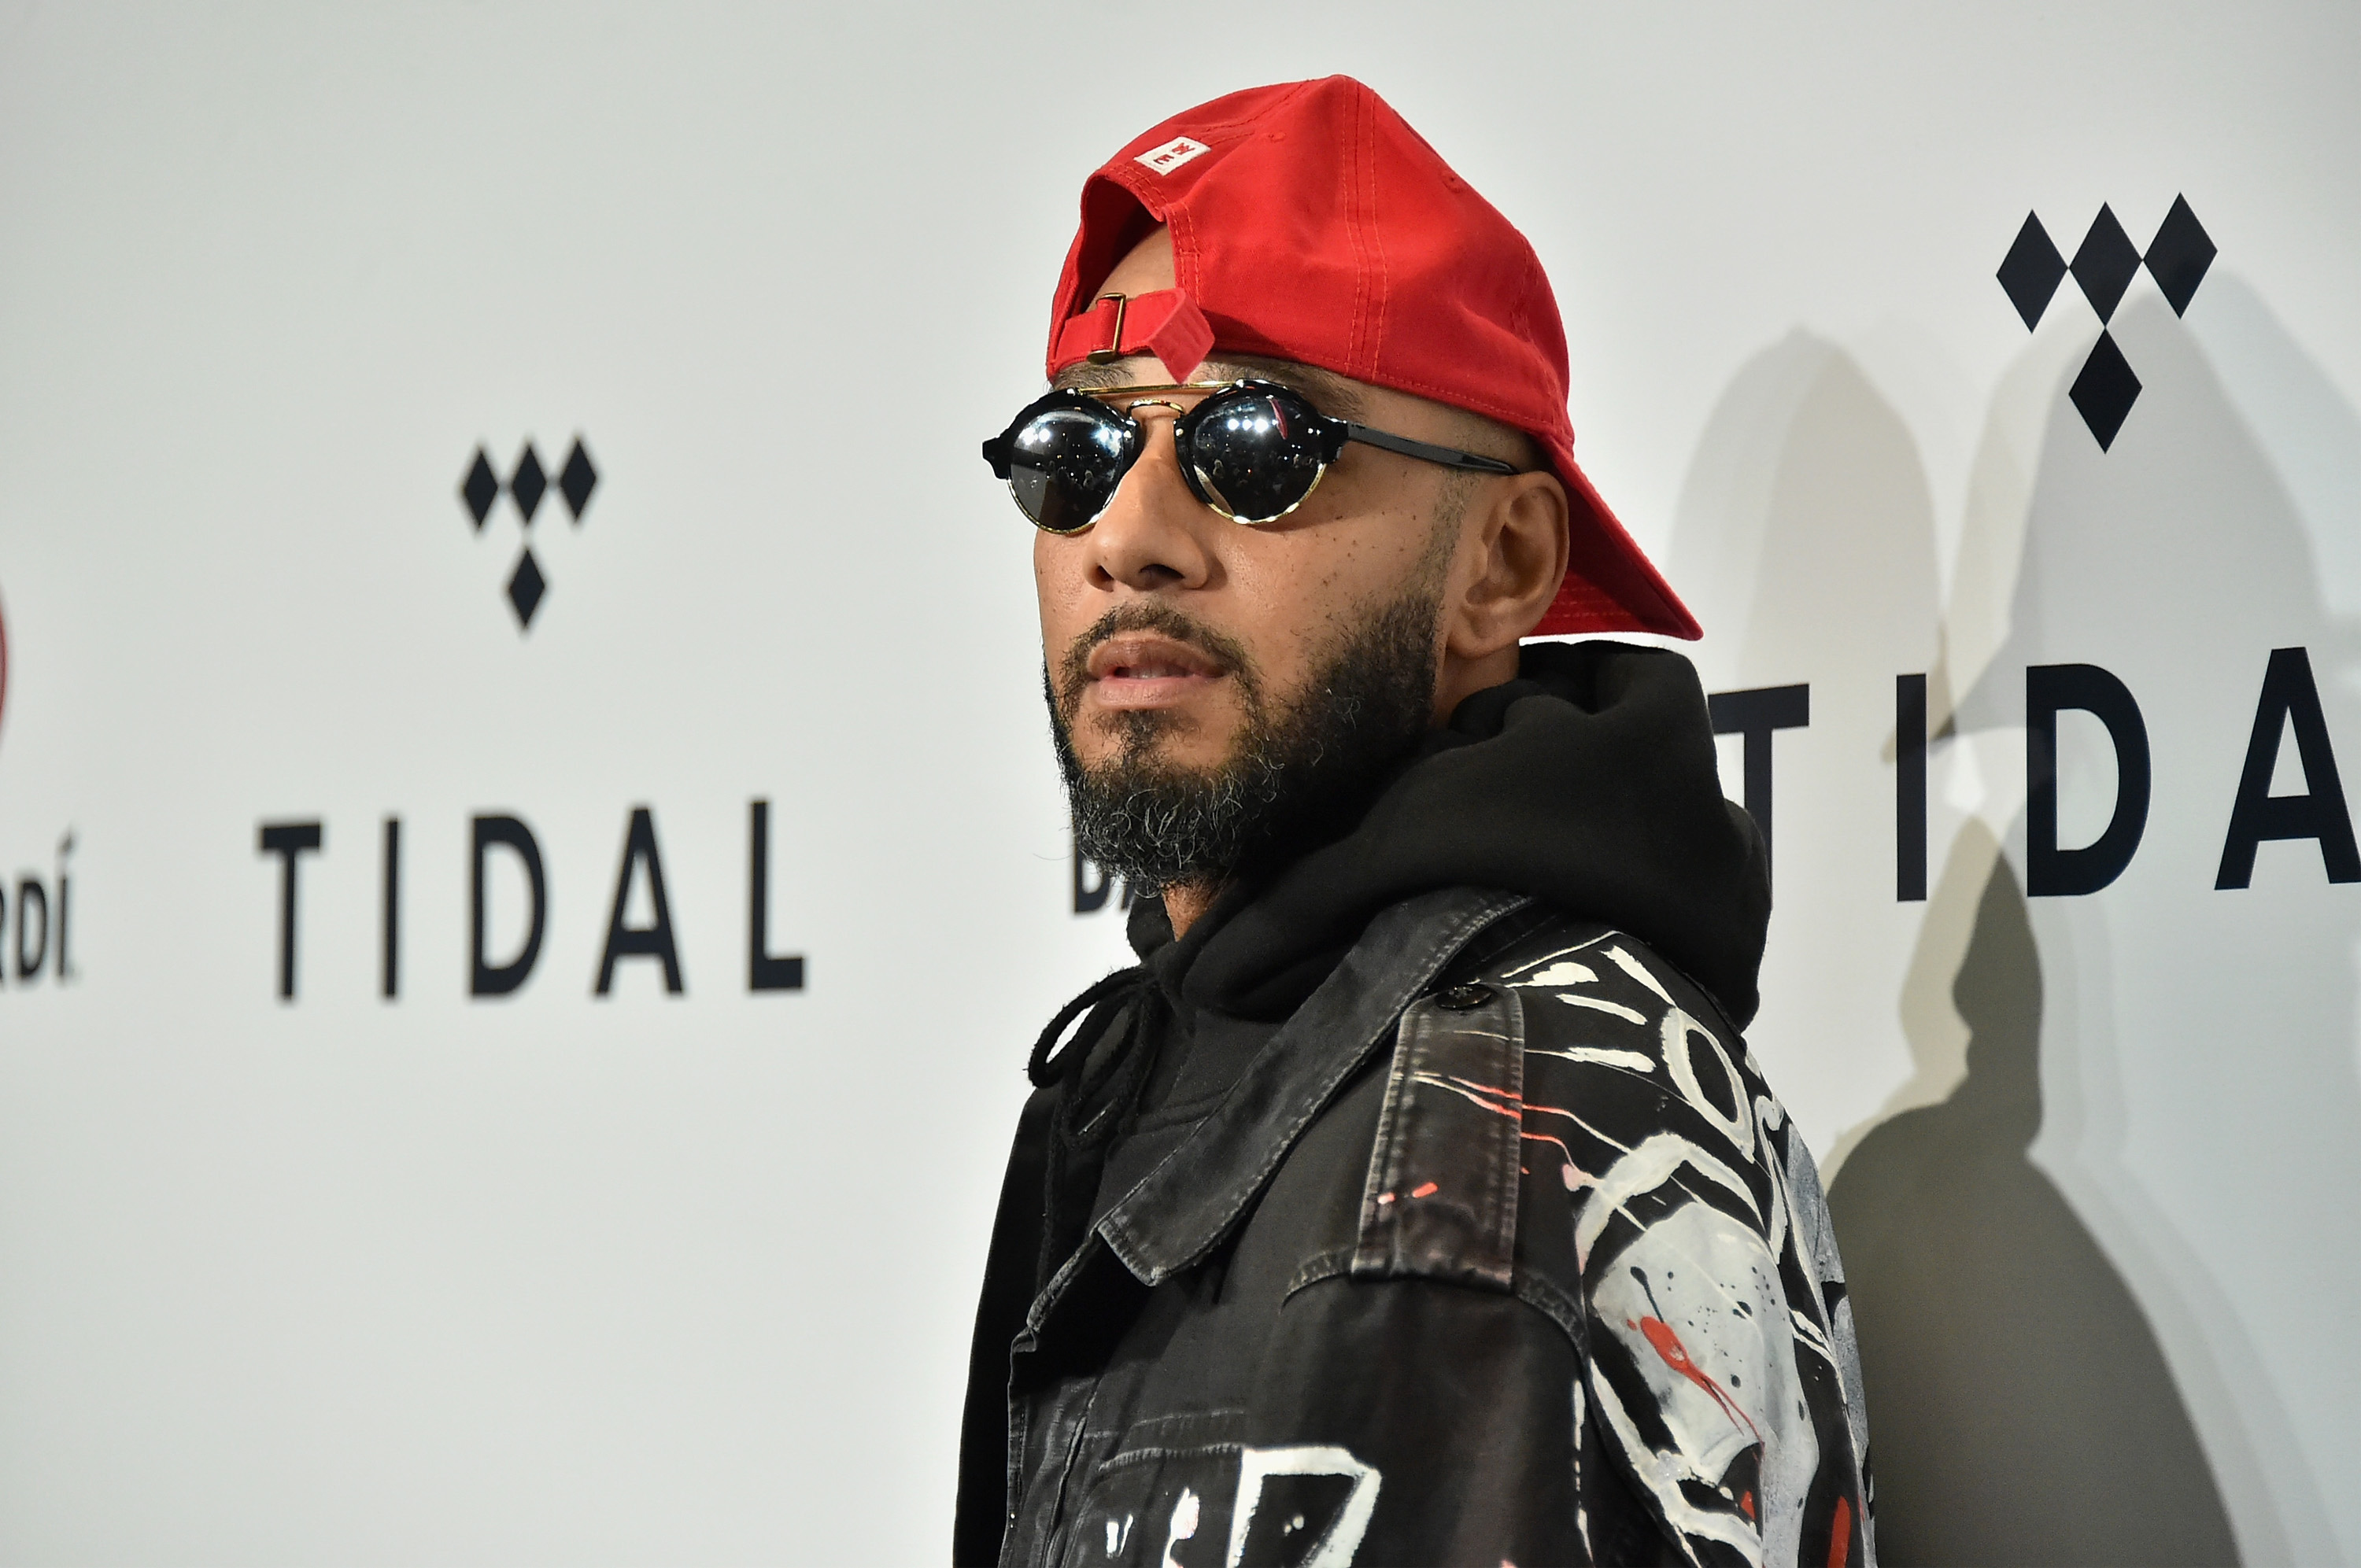 Swizz Beatz Sets Record Straight About Selling Verzuz As Its New Owner TrillerNet Plans To Go Public